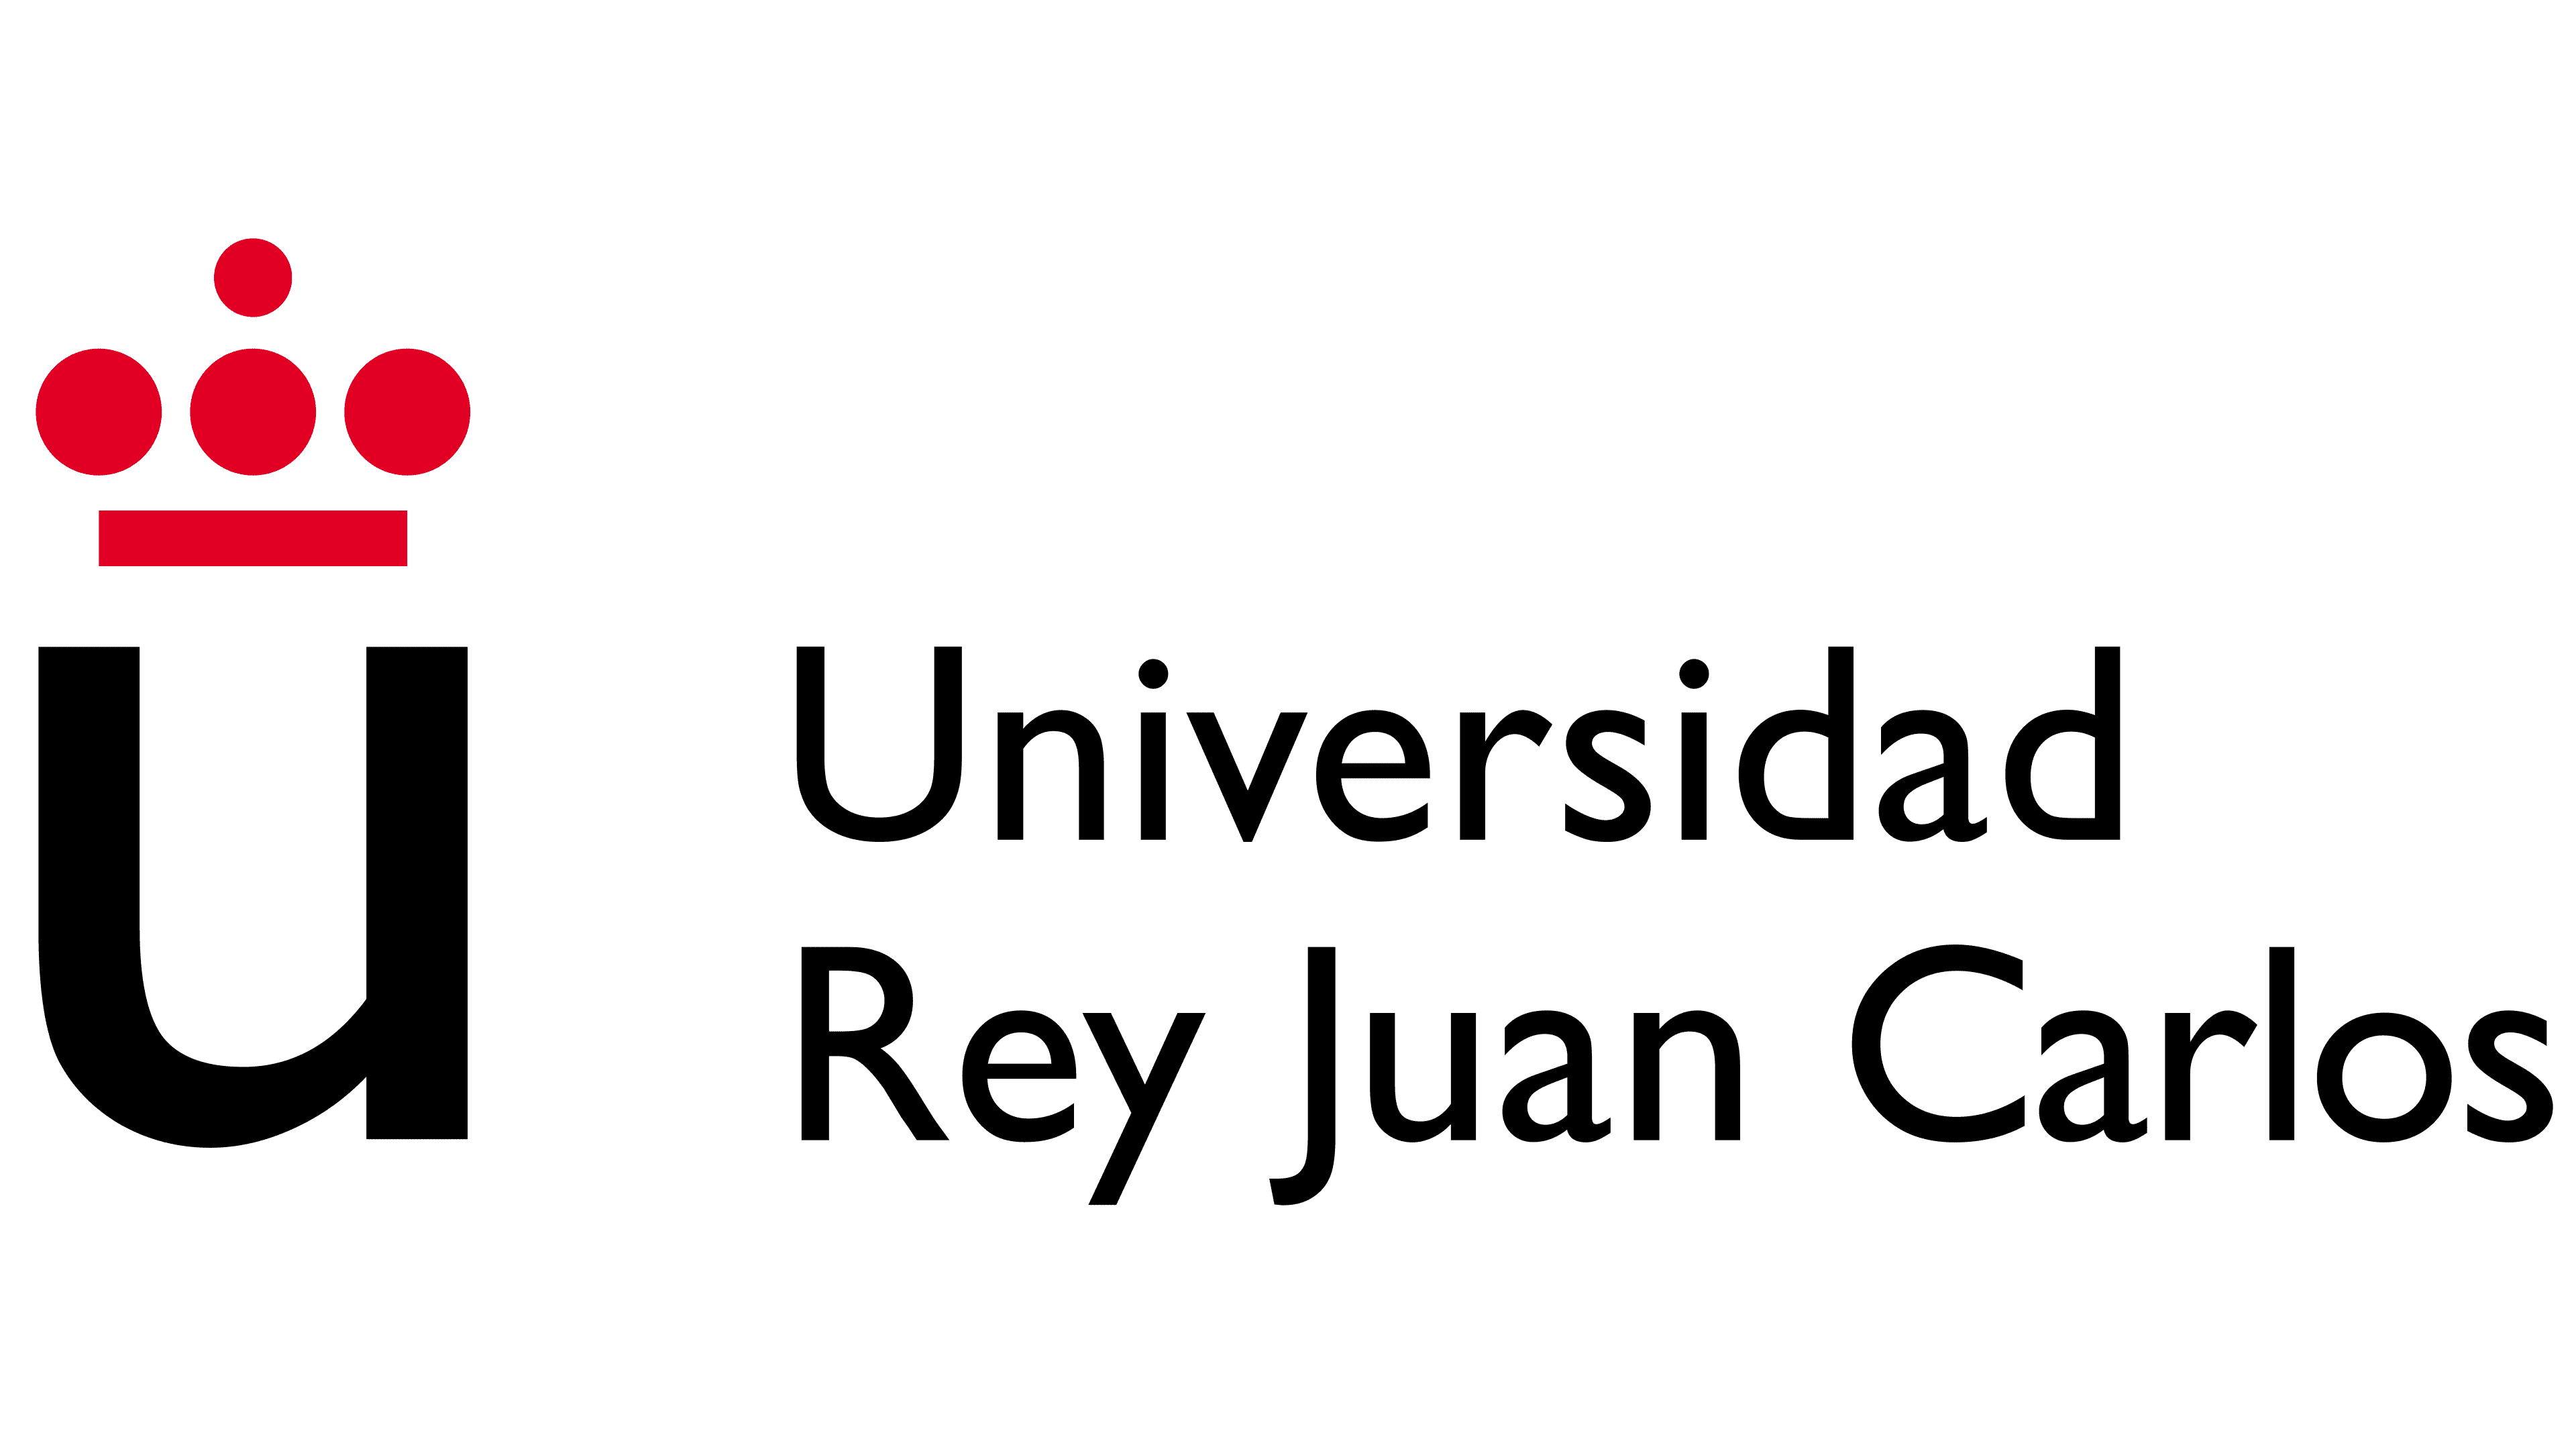 URJC Logo | The most famous brands and company logos in the world